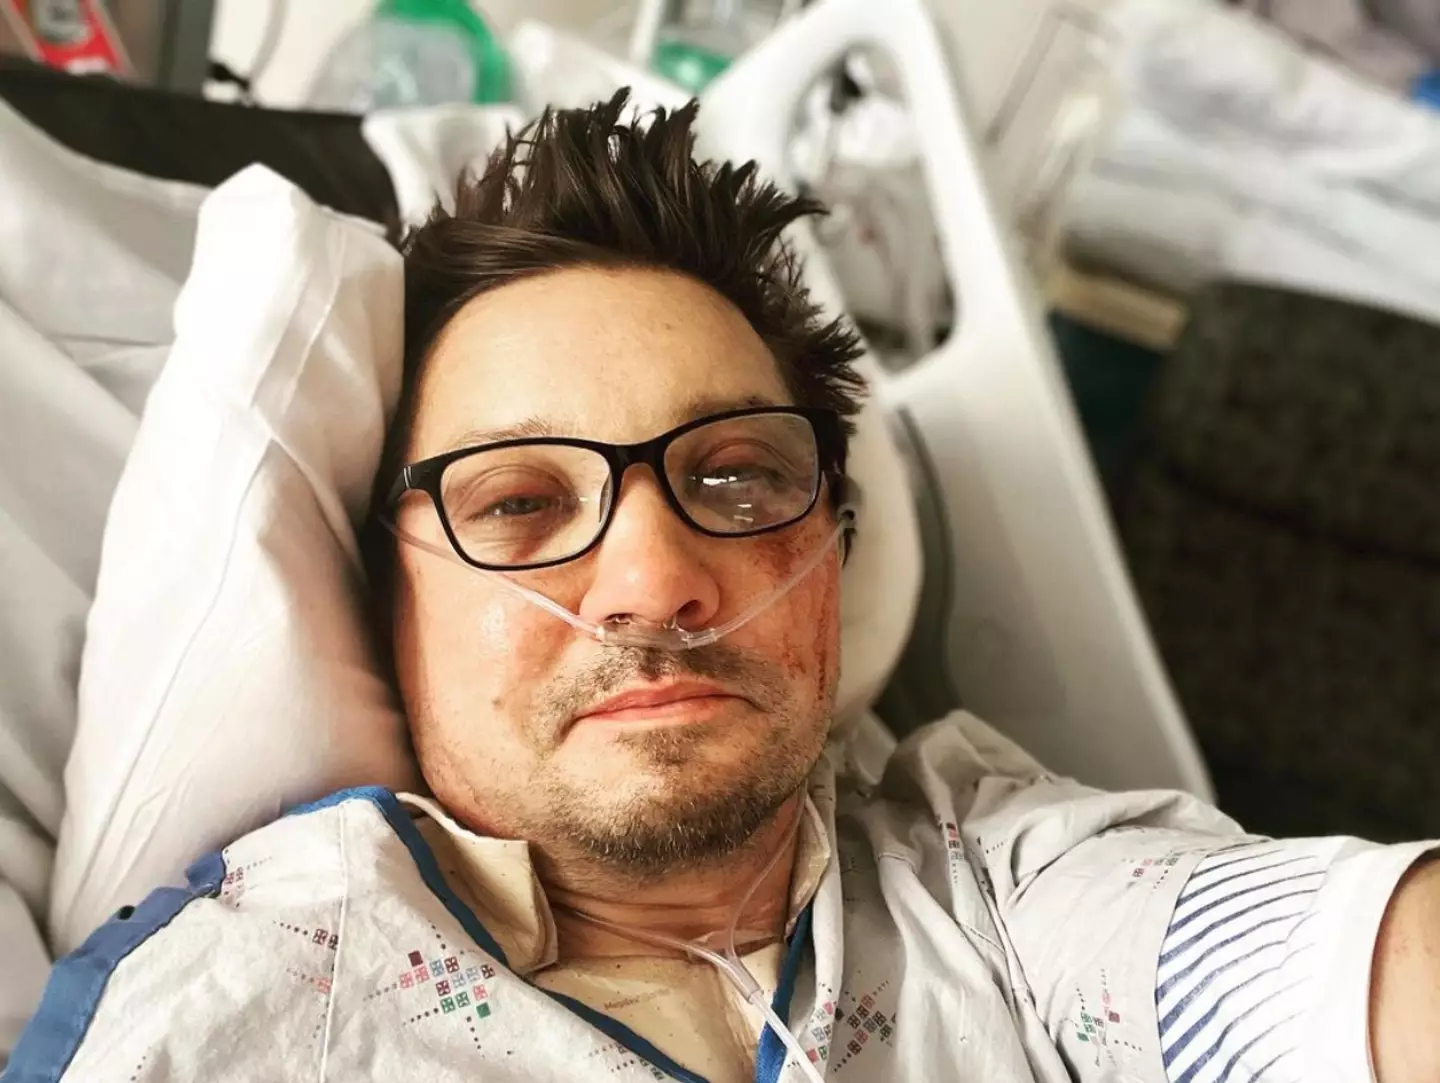 Jeremy Renner posted an update from his hospital bed.